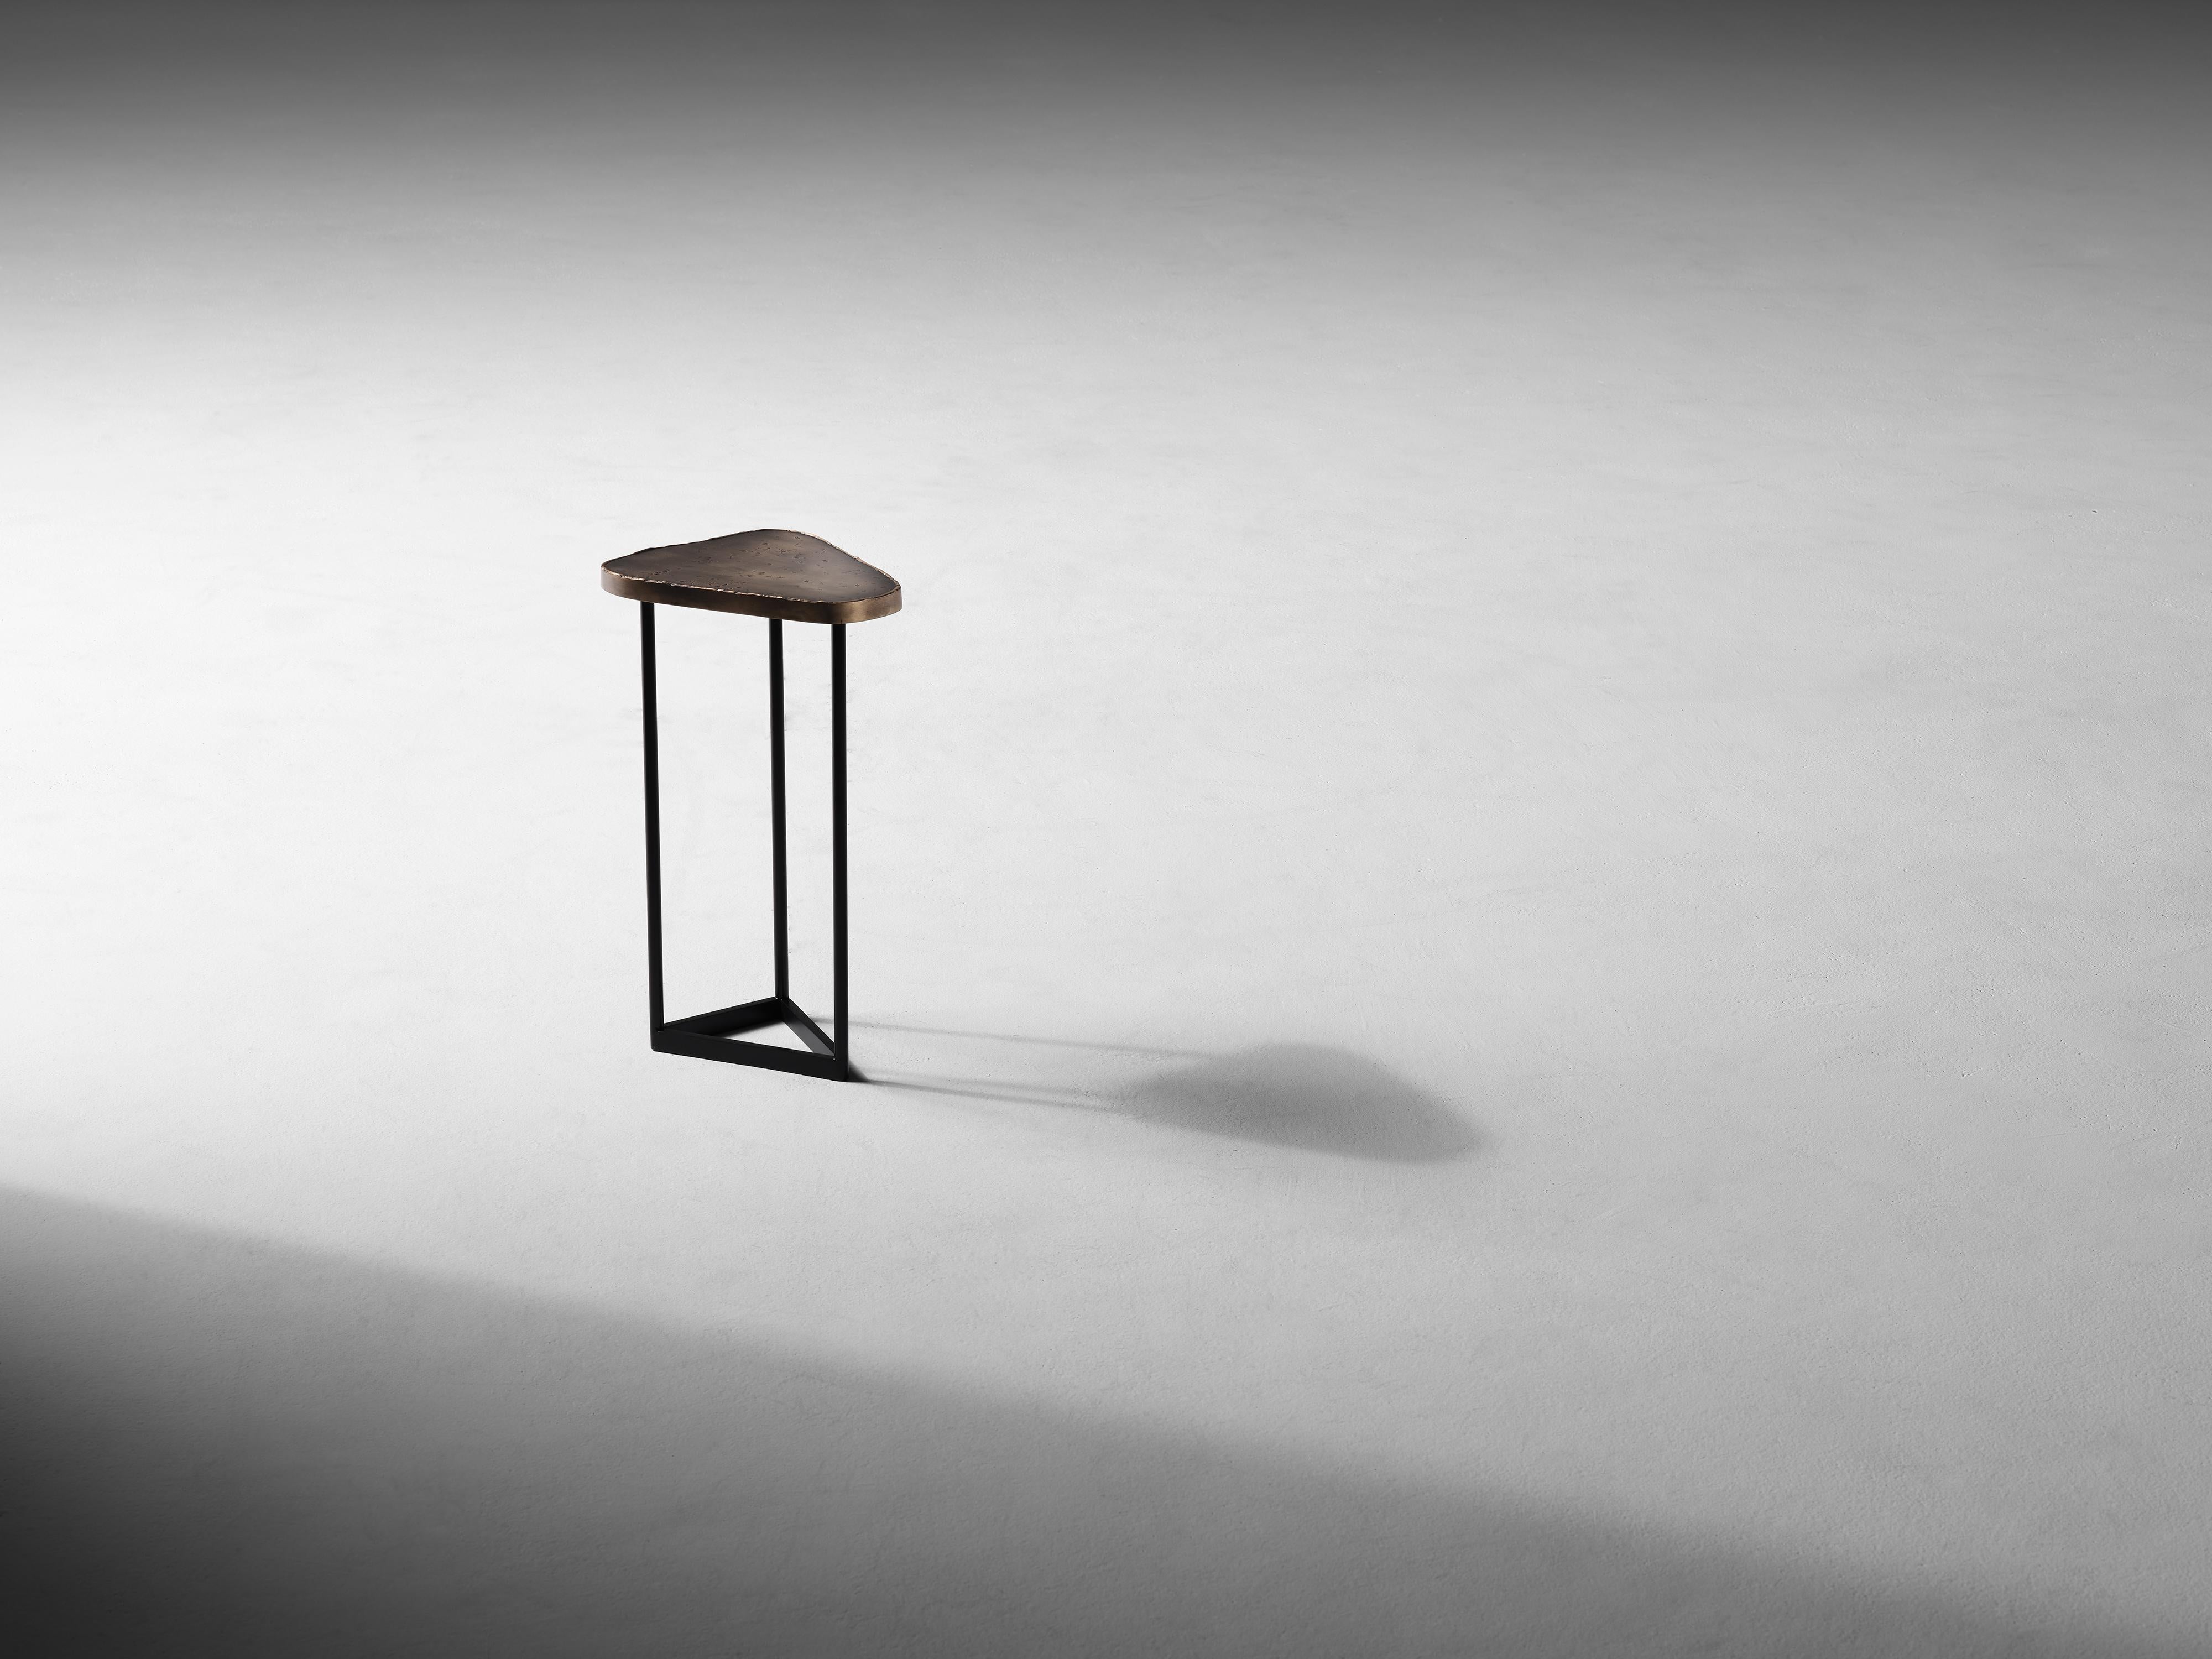 Created in collaboration with Nick Alan King.

This charming side table, an industrial arrangement of warm bronze and cold blackened steel, has a playfully amorphous top, a counterbalance to the rigid geometry of its legs and base.

Douglas Fanning